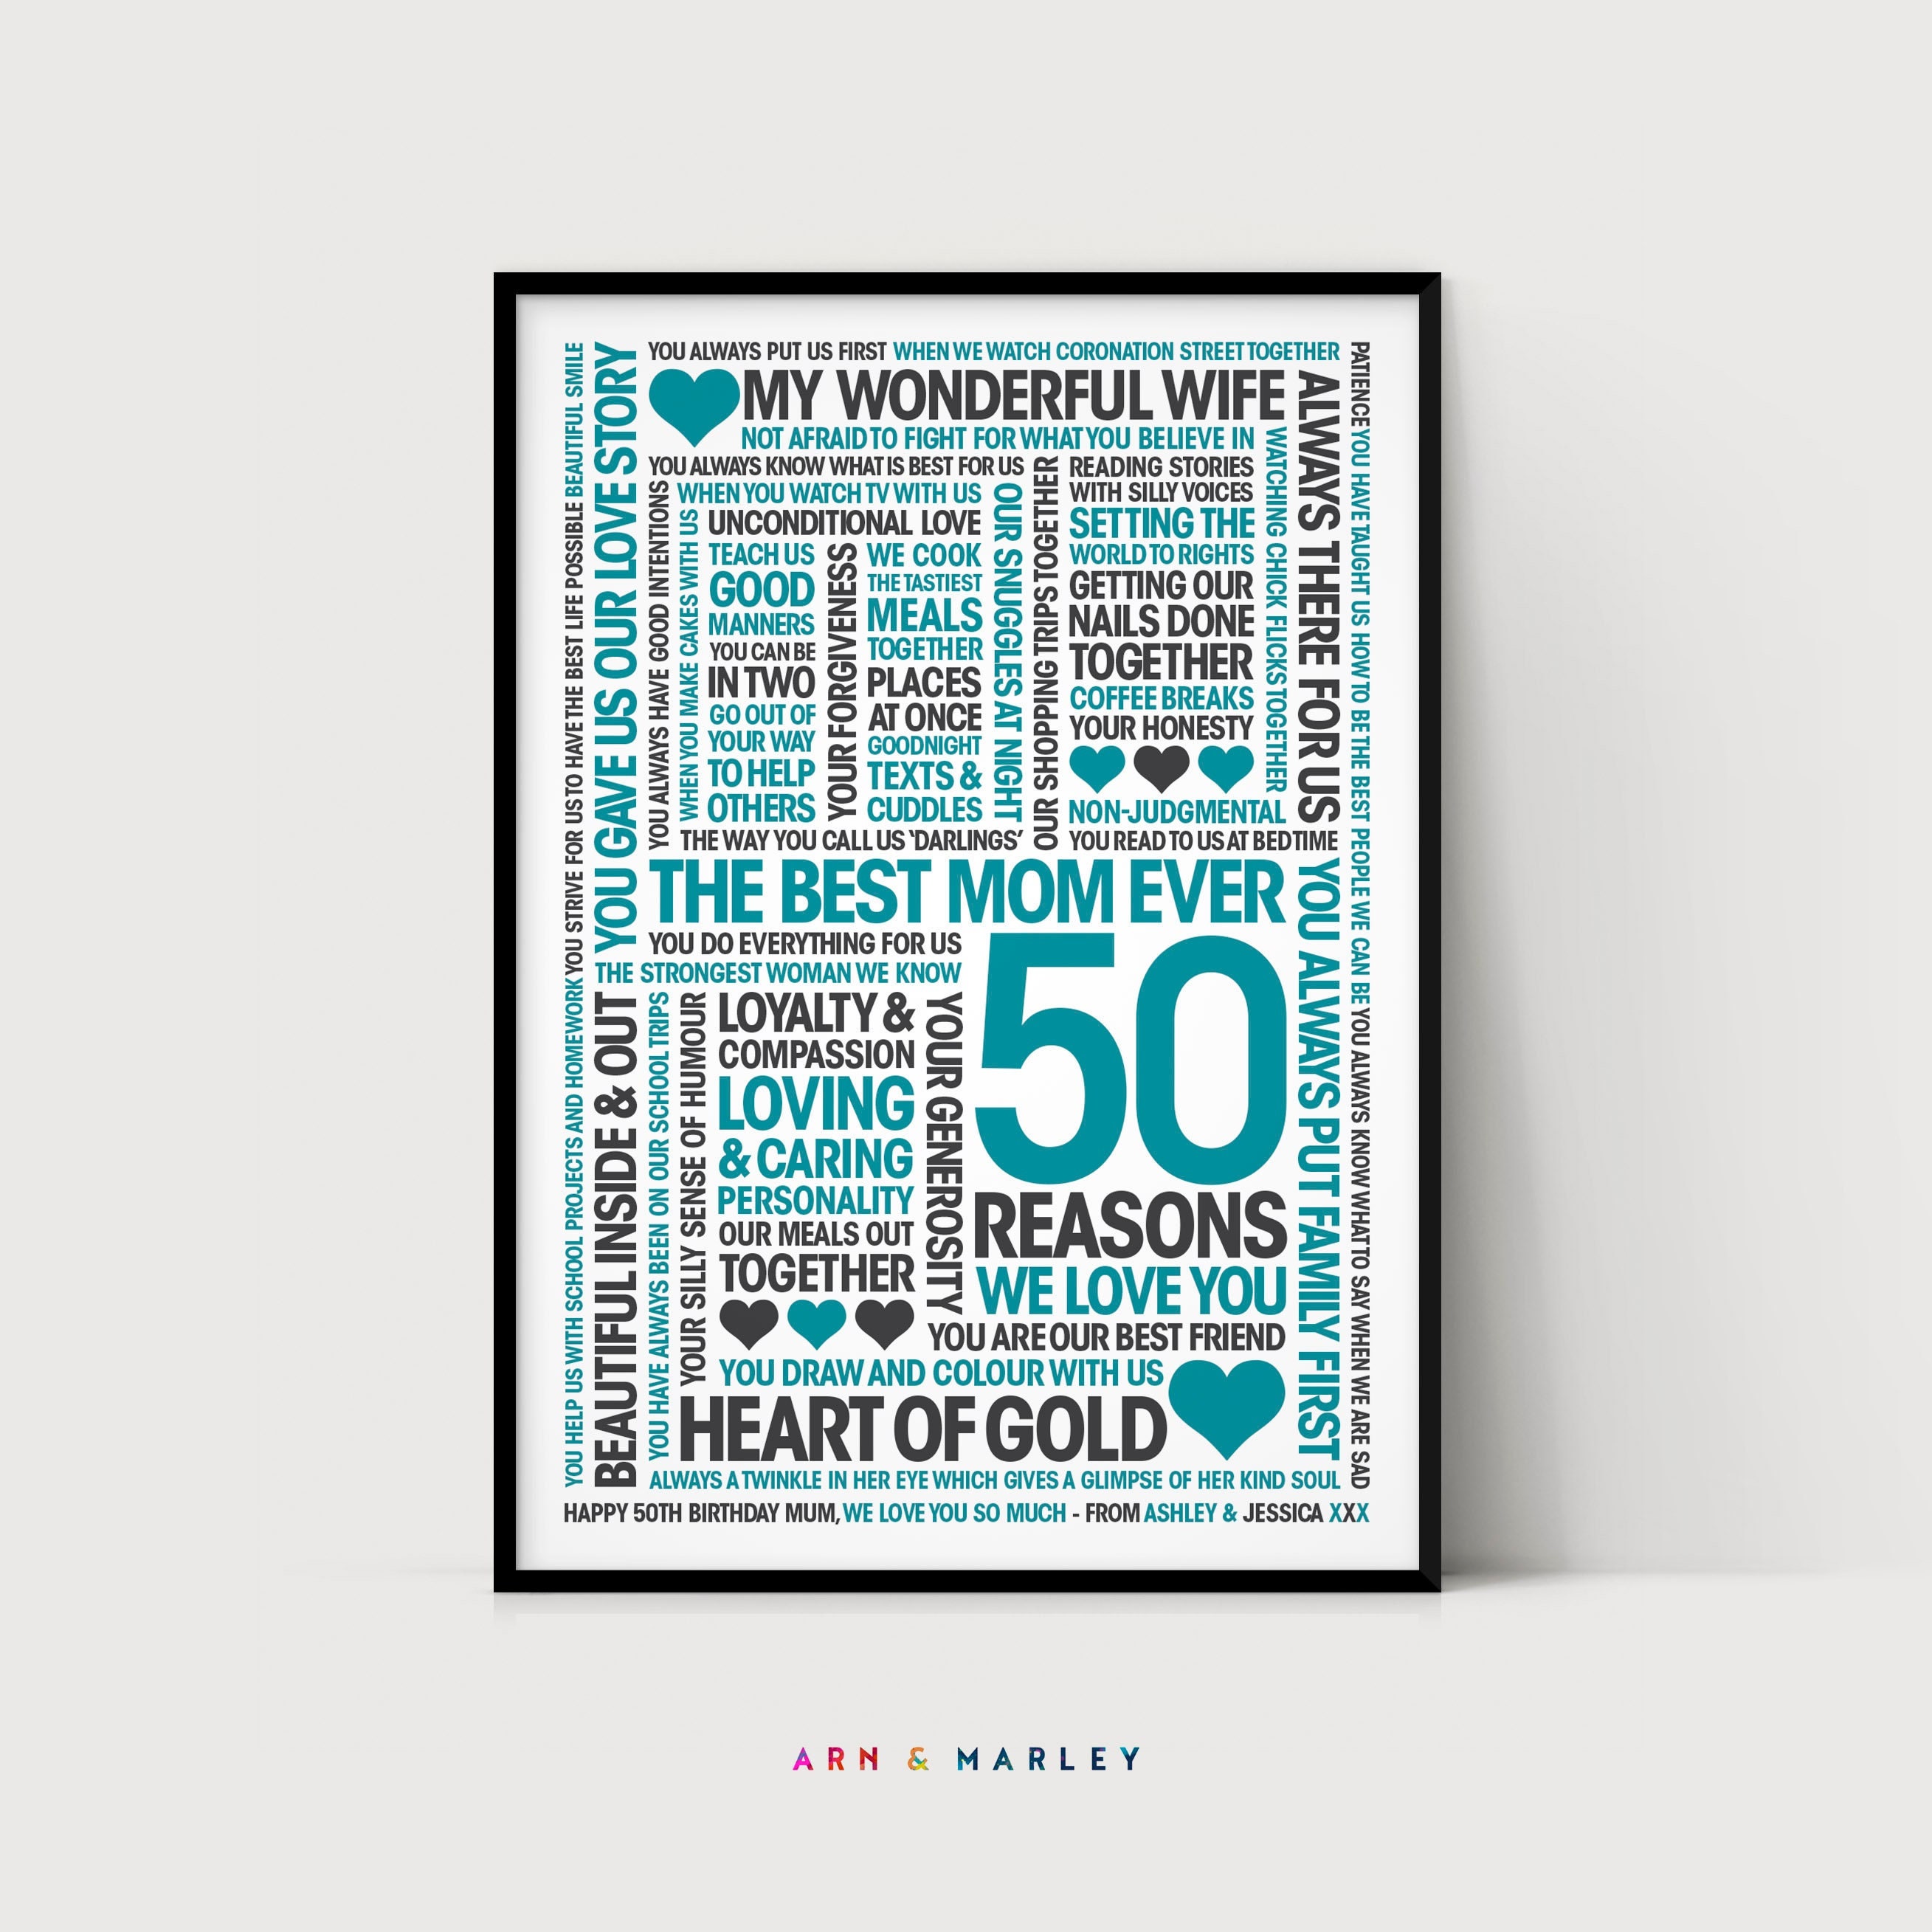 50 Reasons We Love You, Personalized 50th for Mom, Mum's Birthday Gift  Custom Digital print It Yourself 